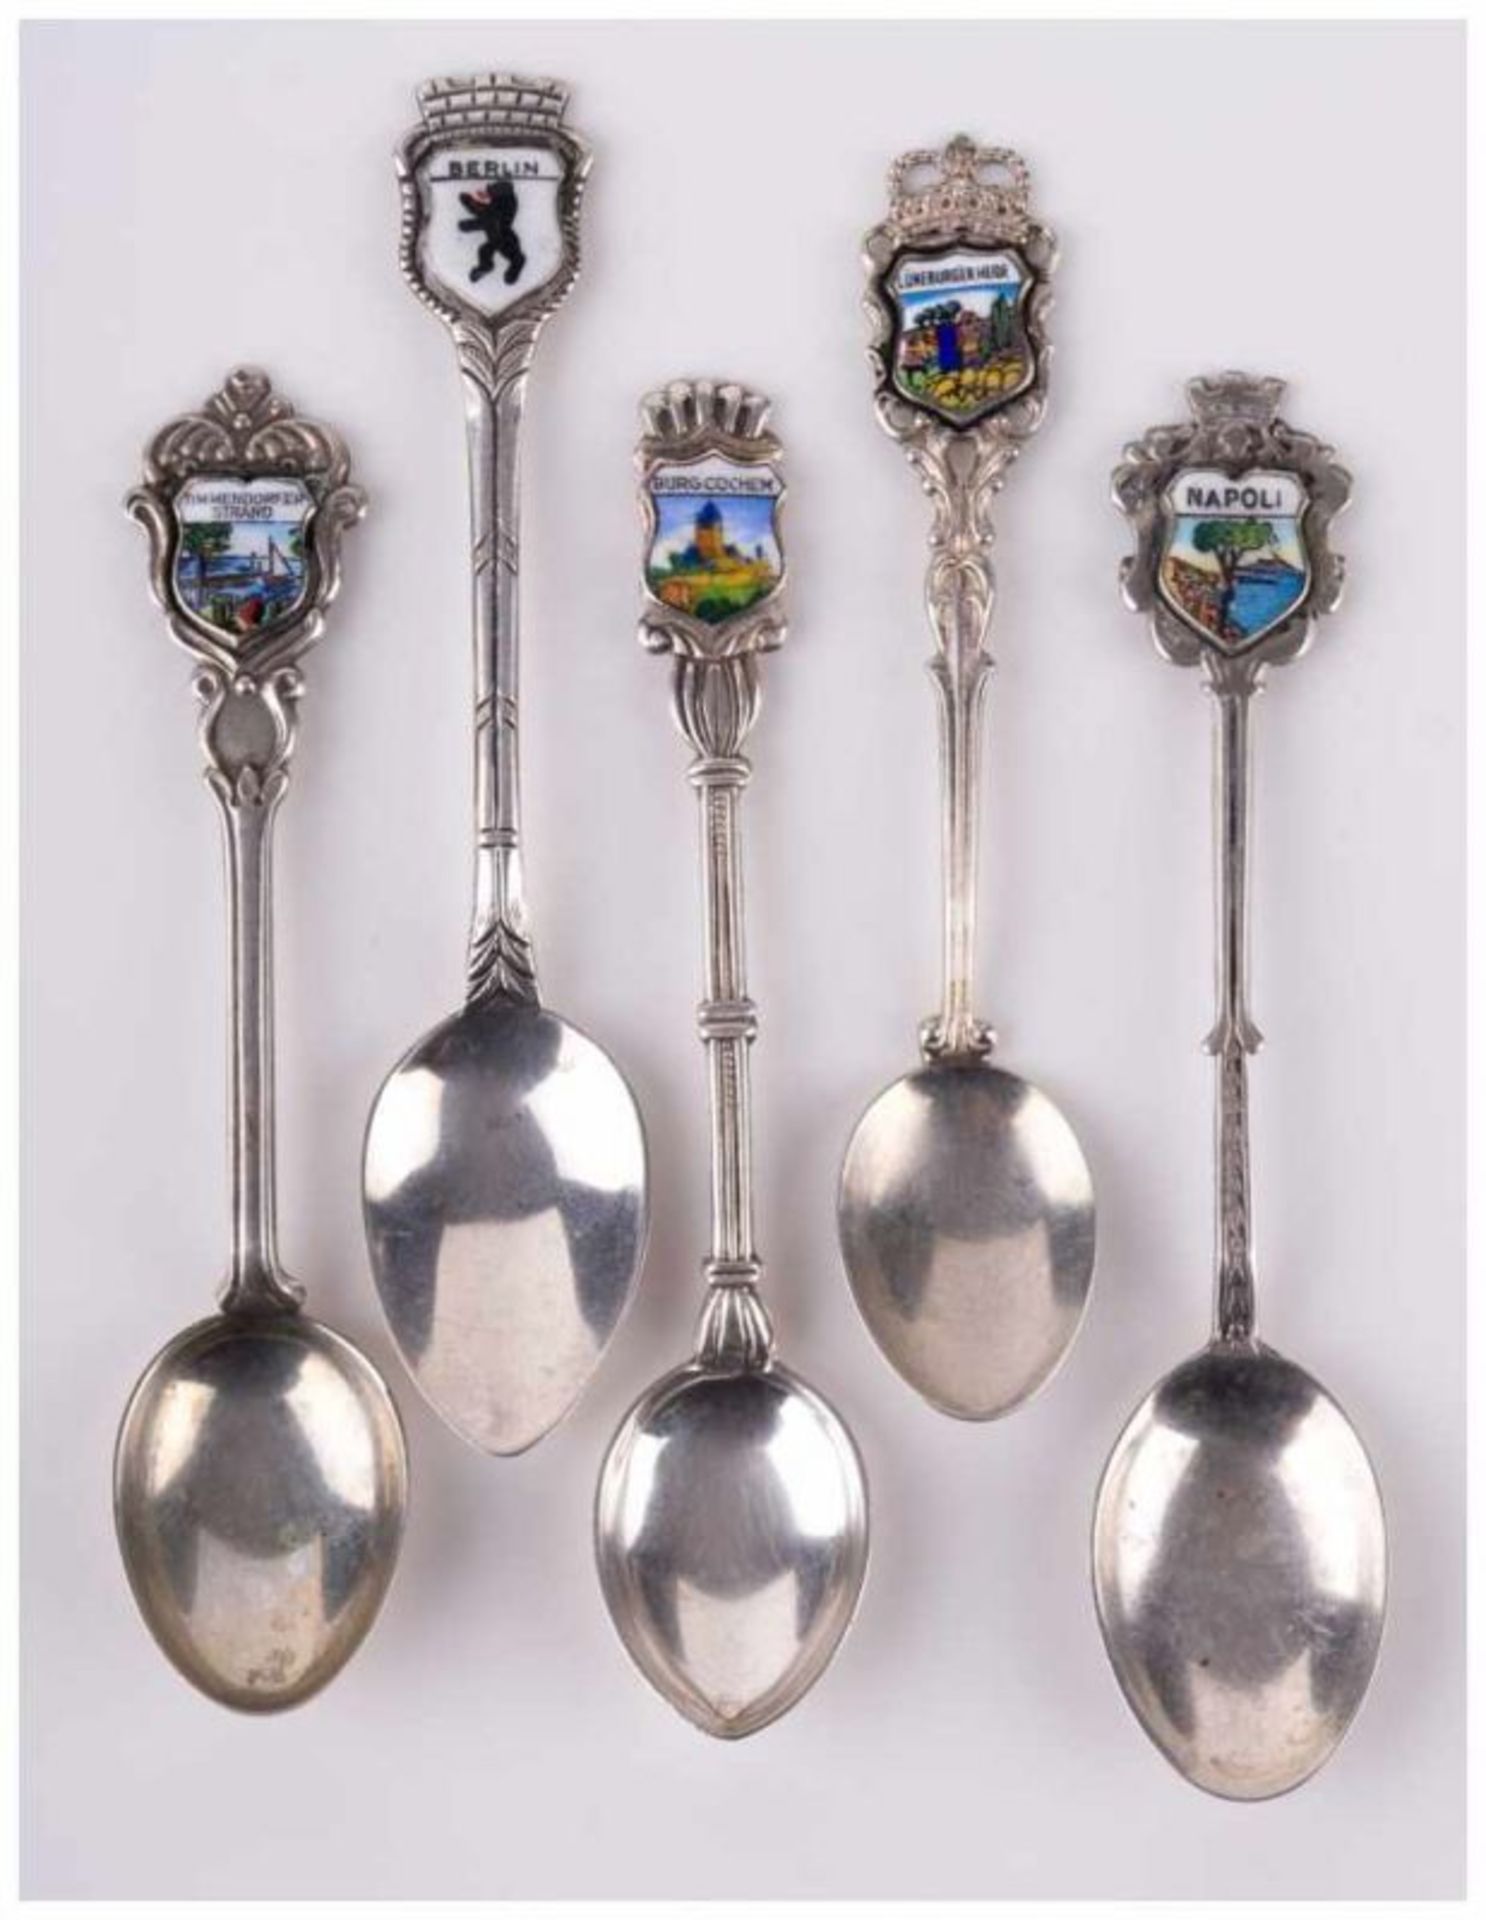 5 Andenkenlöffel um 1920/40 / 5 souvenir spoons, silver about 1920/40 - Silber [...] - Image 2 of 8